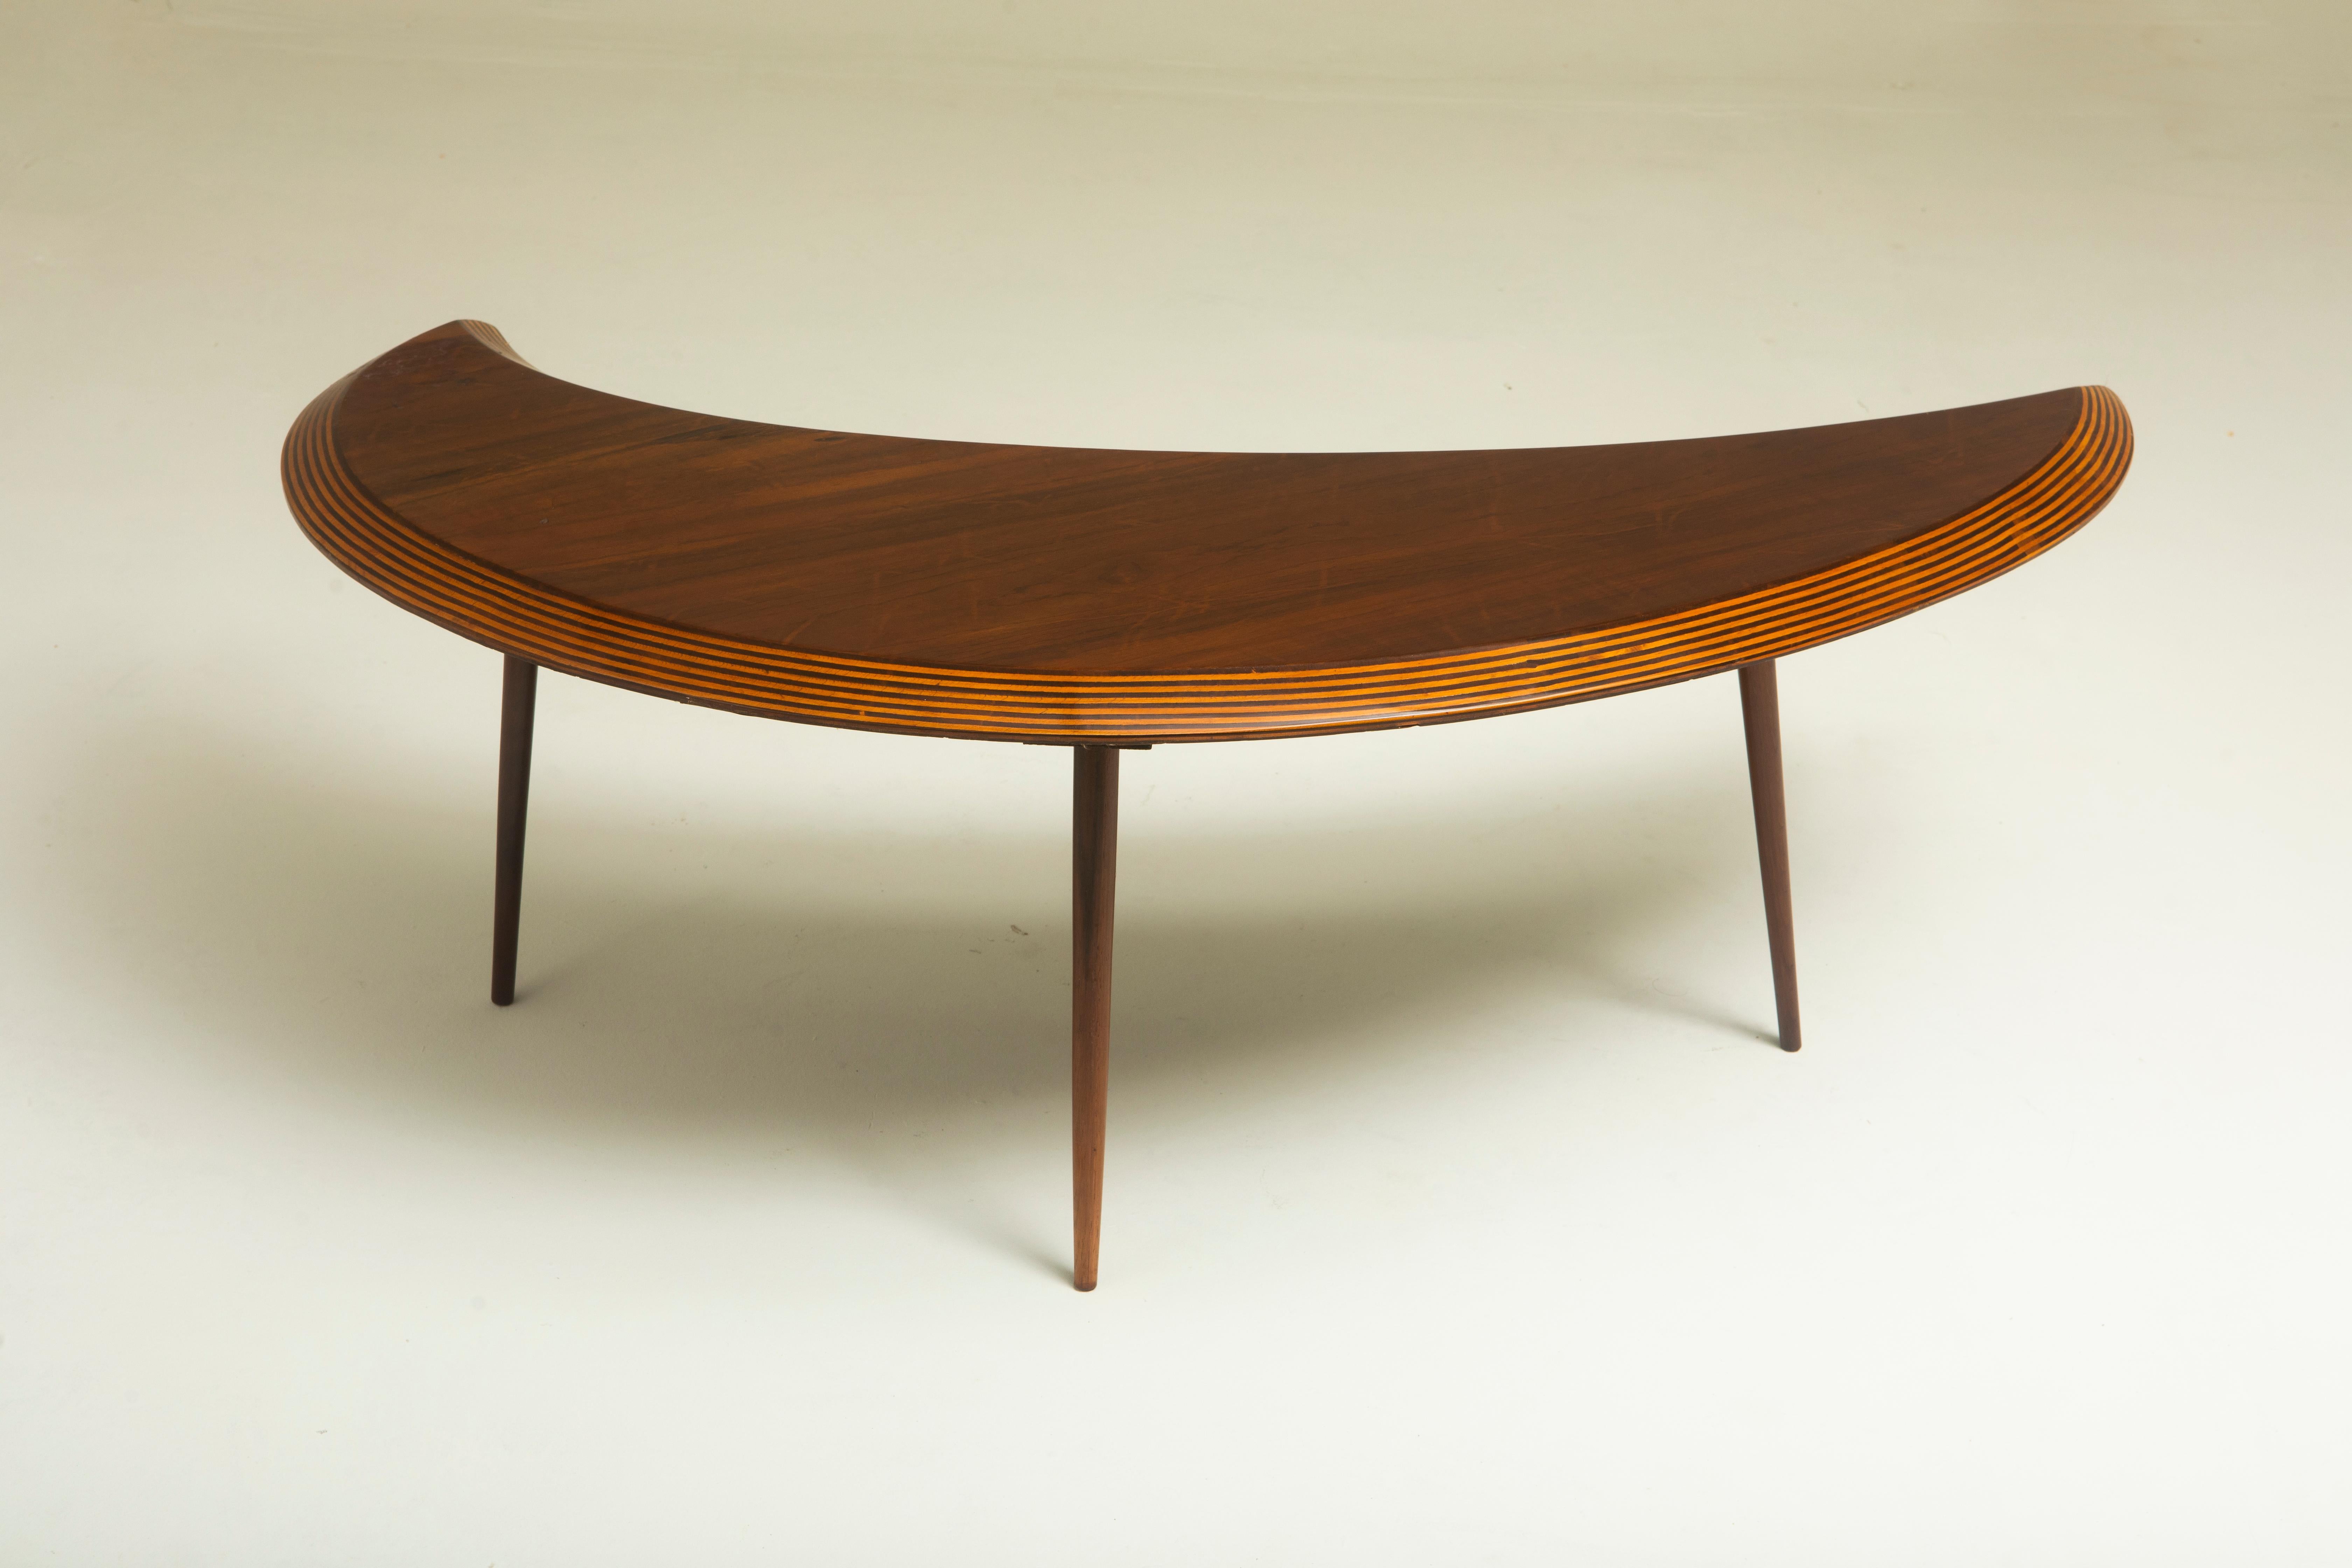 Mid-20th Century 'Half Moon' Center Table by CIMO Studio, Brazil, 1950s For Sale